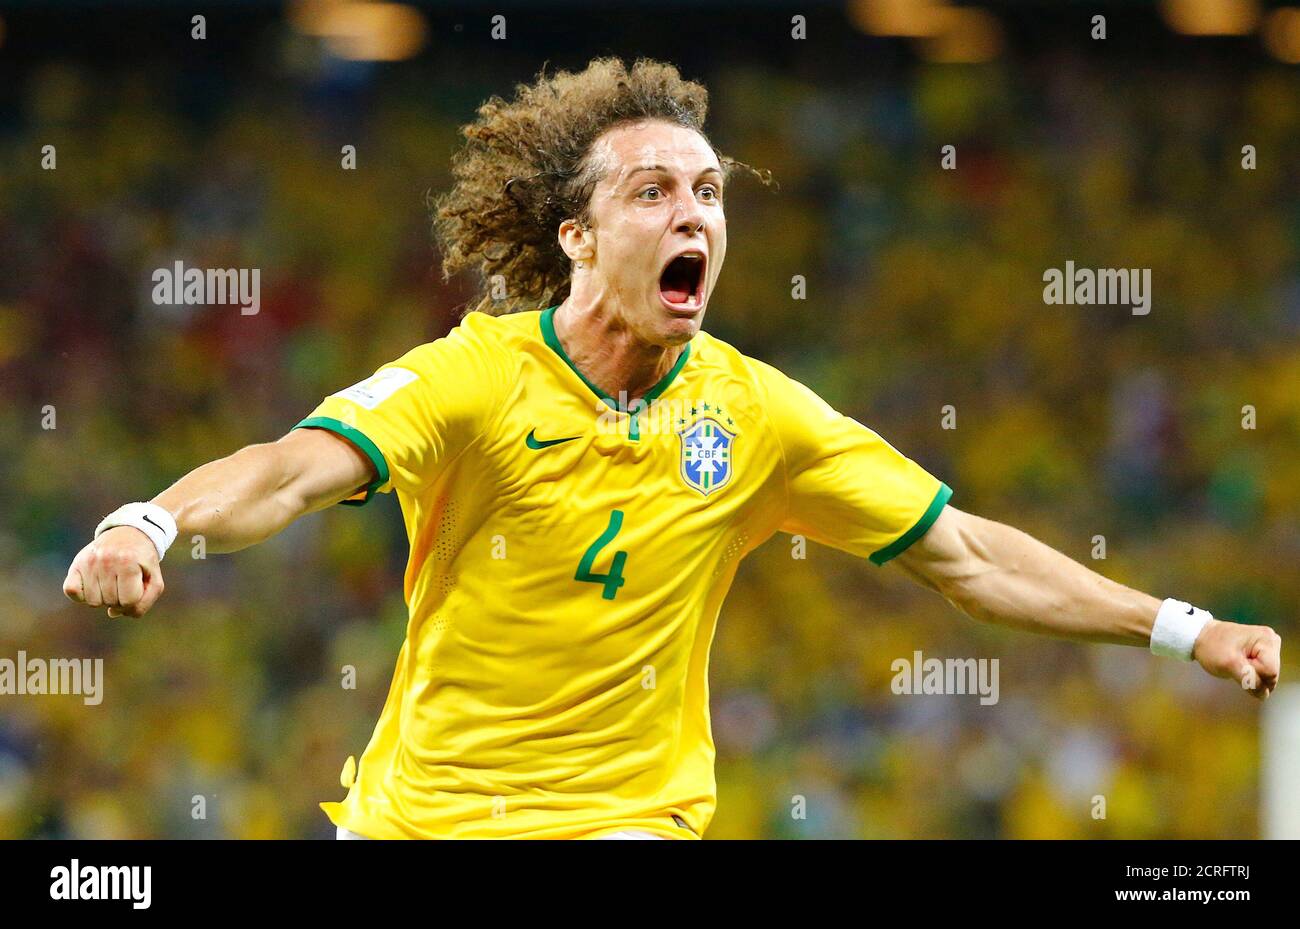 Brazil's David Luiz celebrates after scoring a goal against Colombia during the 2014 World Cup quarter-finals soccer match at the Castelao arena in Fortaleza July 4, 2014.   REUTERS/Stefano Rellandini (BRAZIL  - Tags: SOCCER SPORT WORLD CUP) Stock Photo